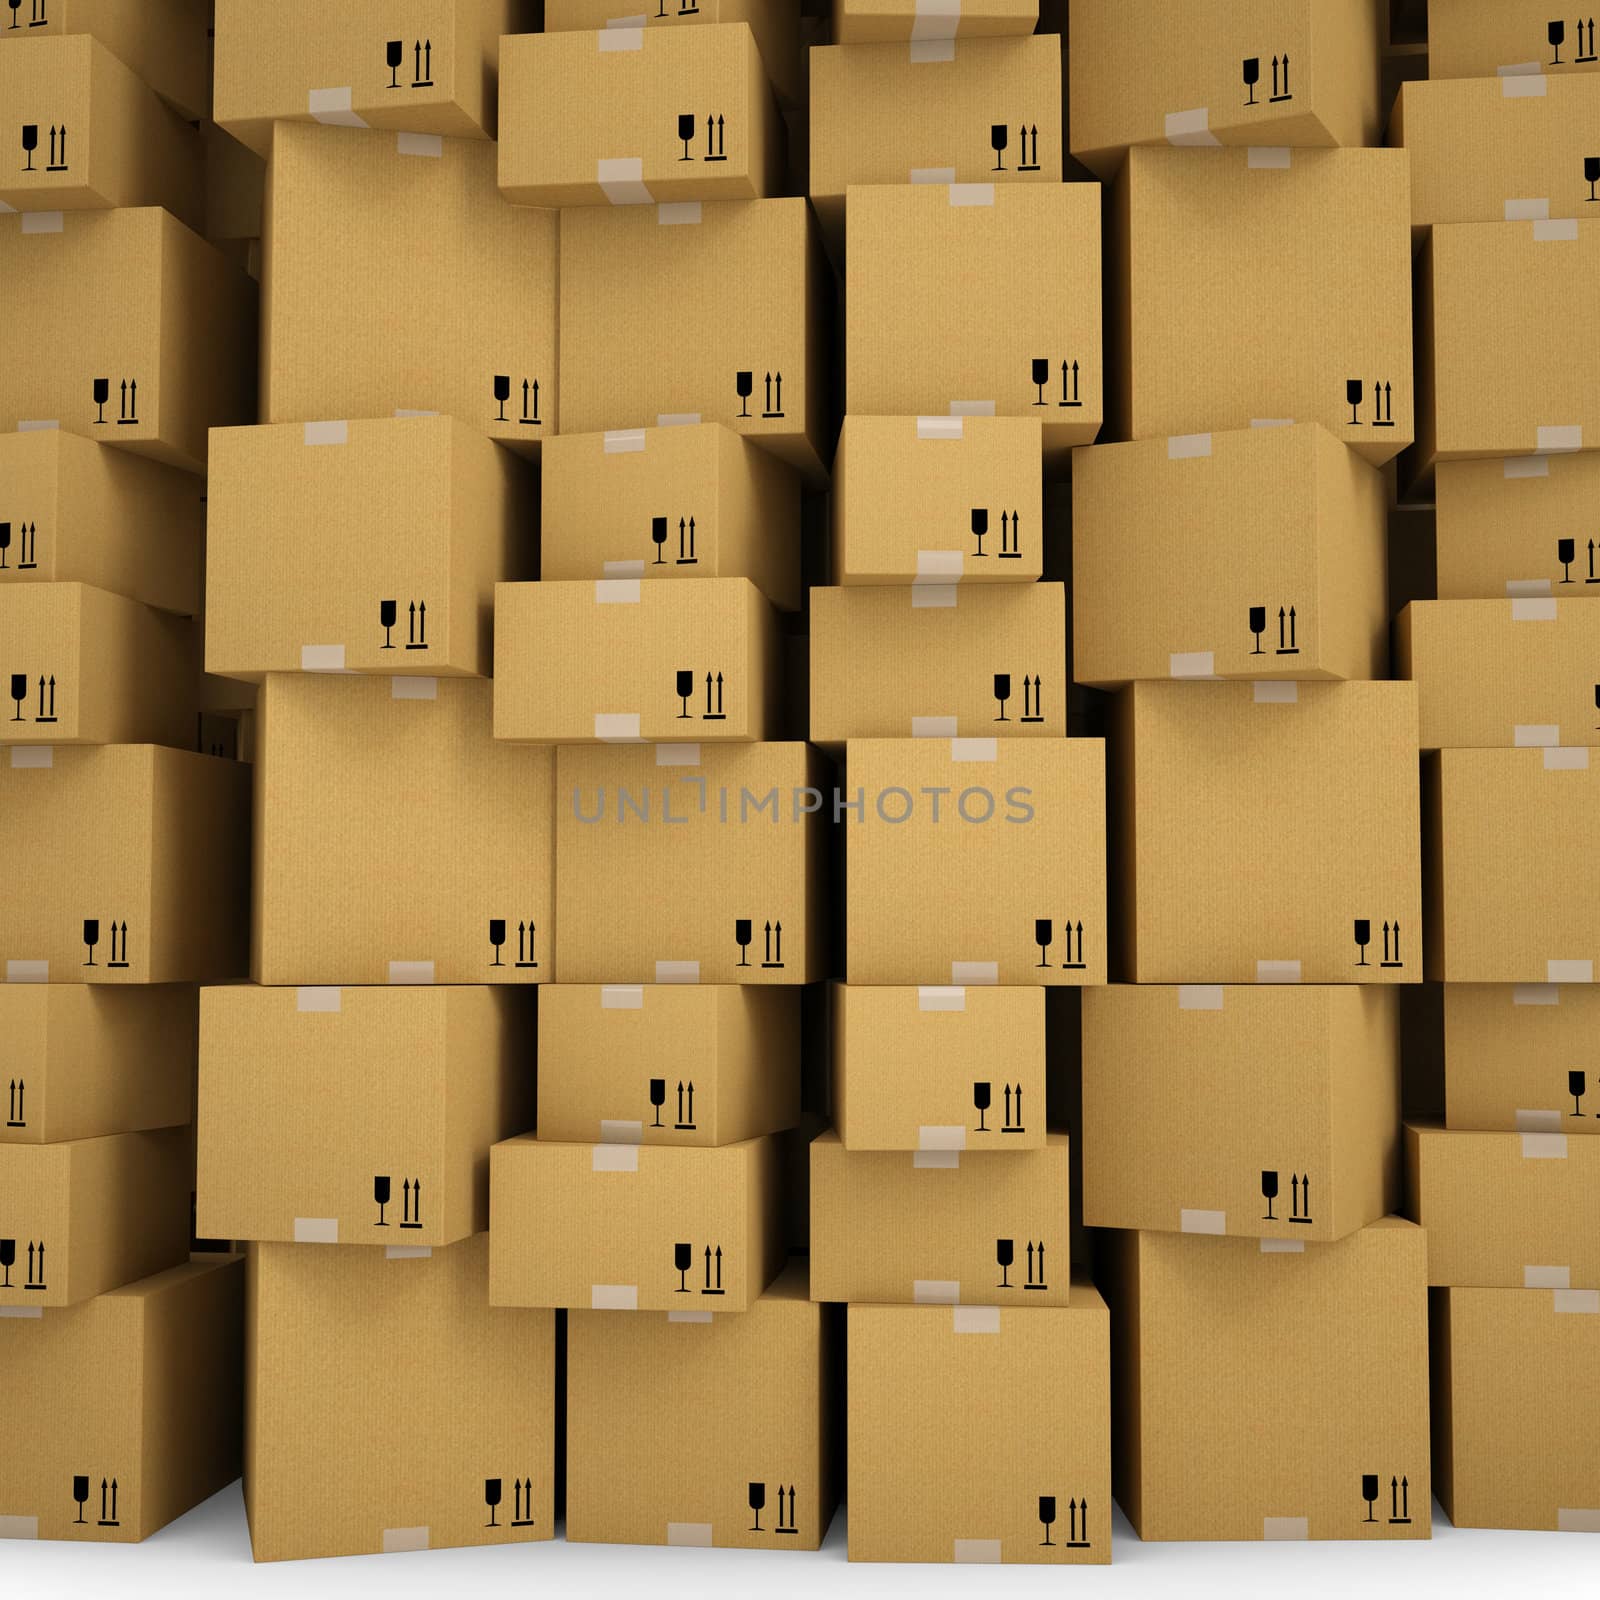 The wall of cardboard boxes. Isolated render on a white background